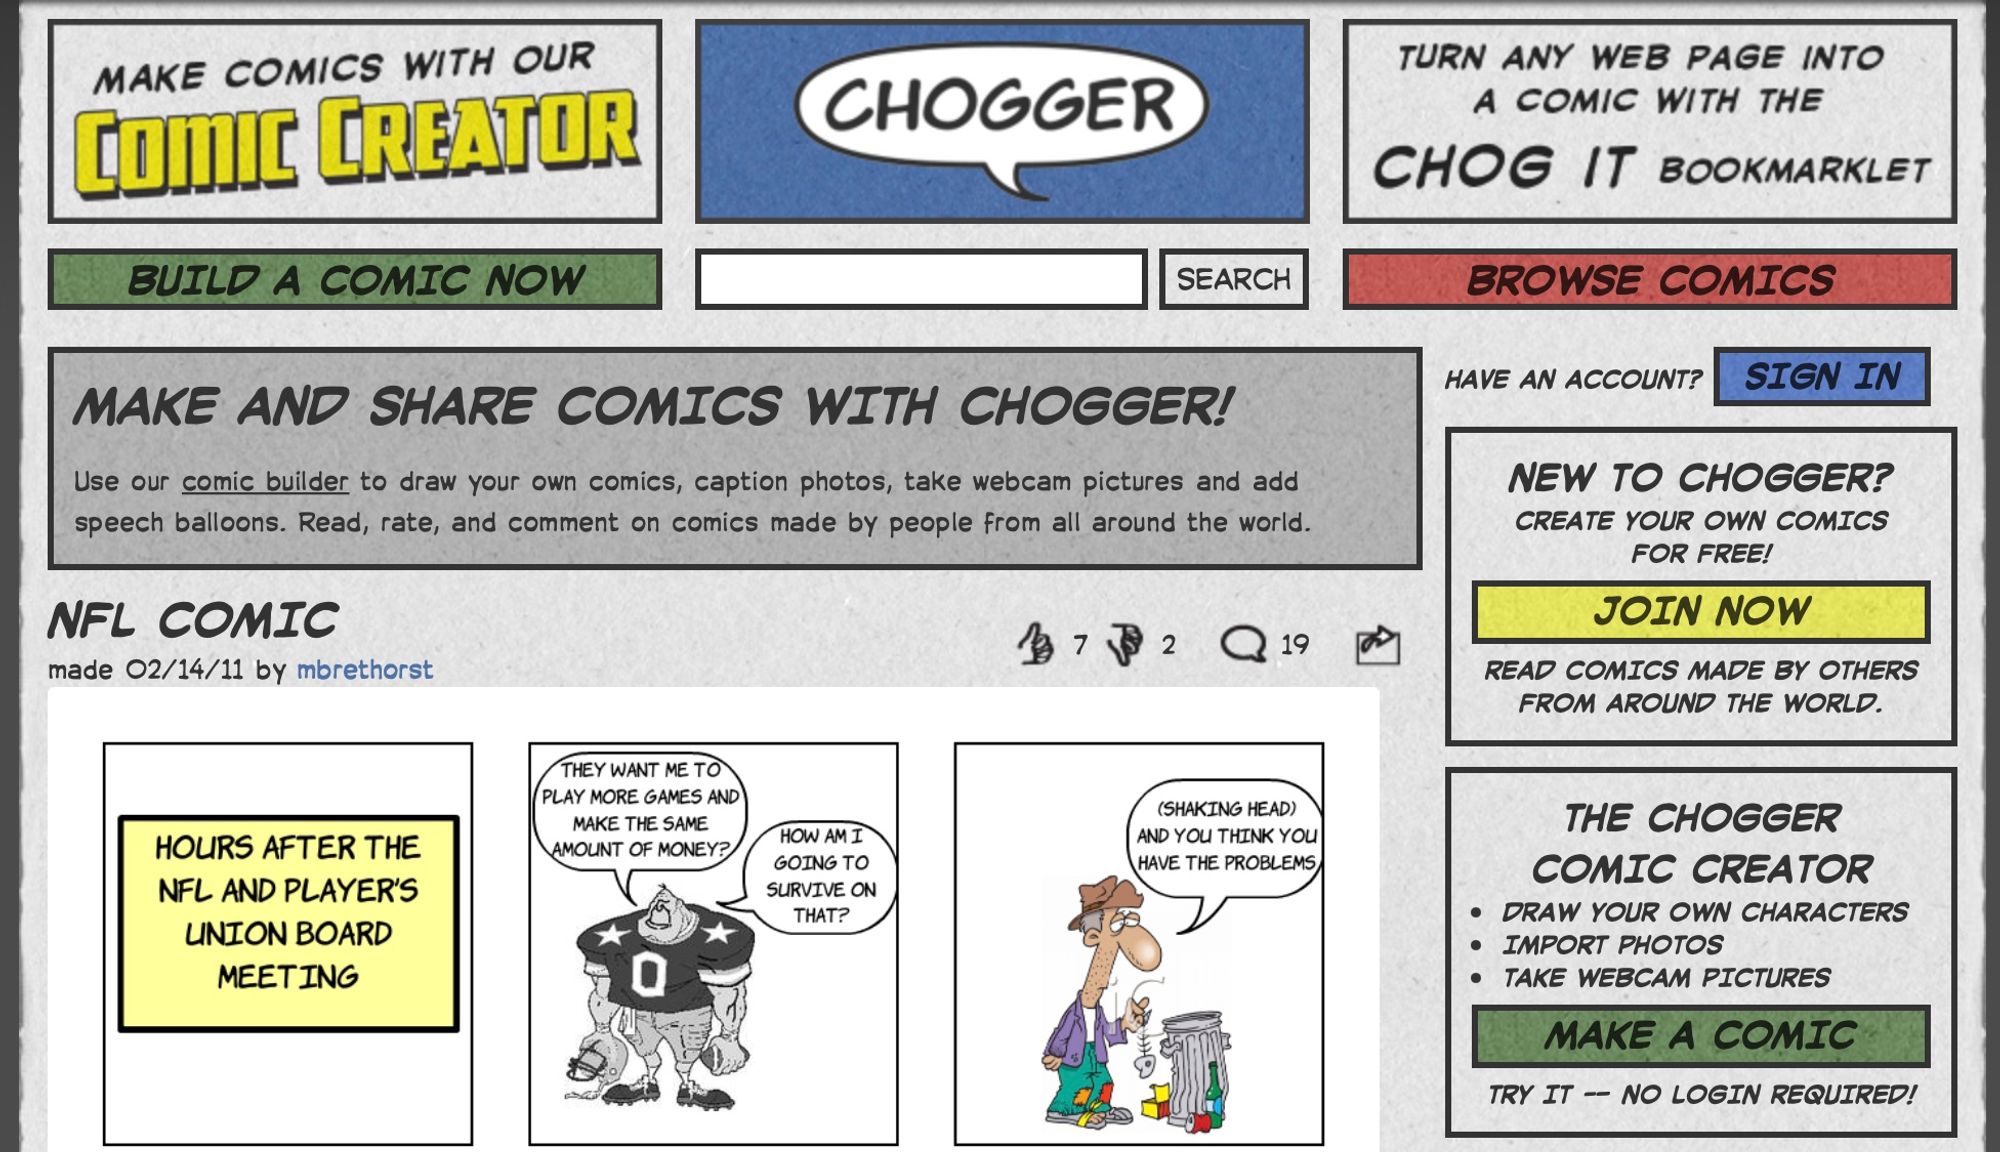 Chogger website used fun CSS tricks to create an authentic comic book style.